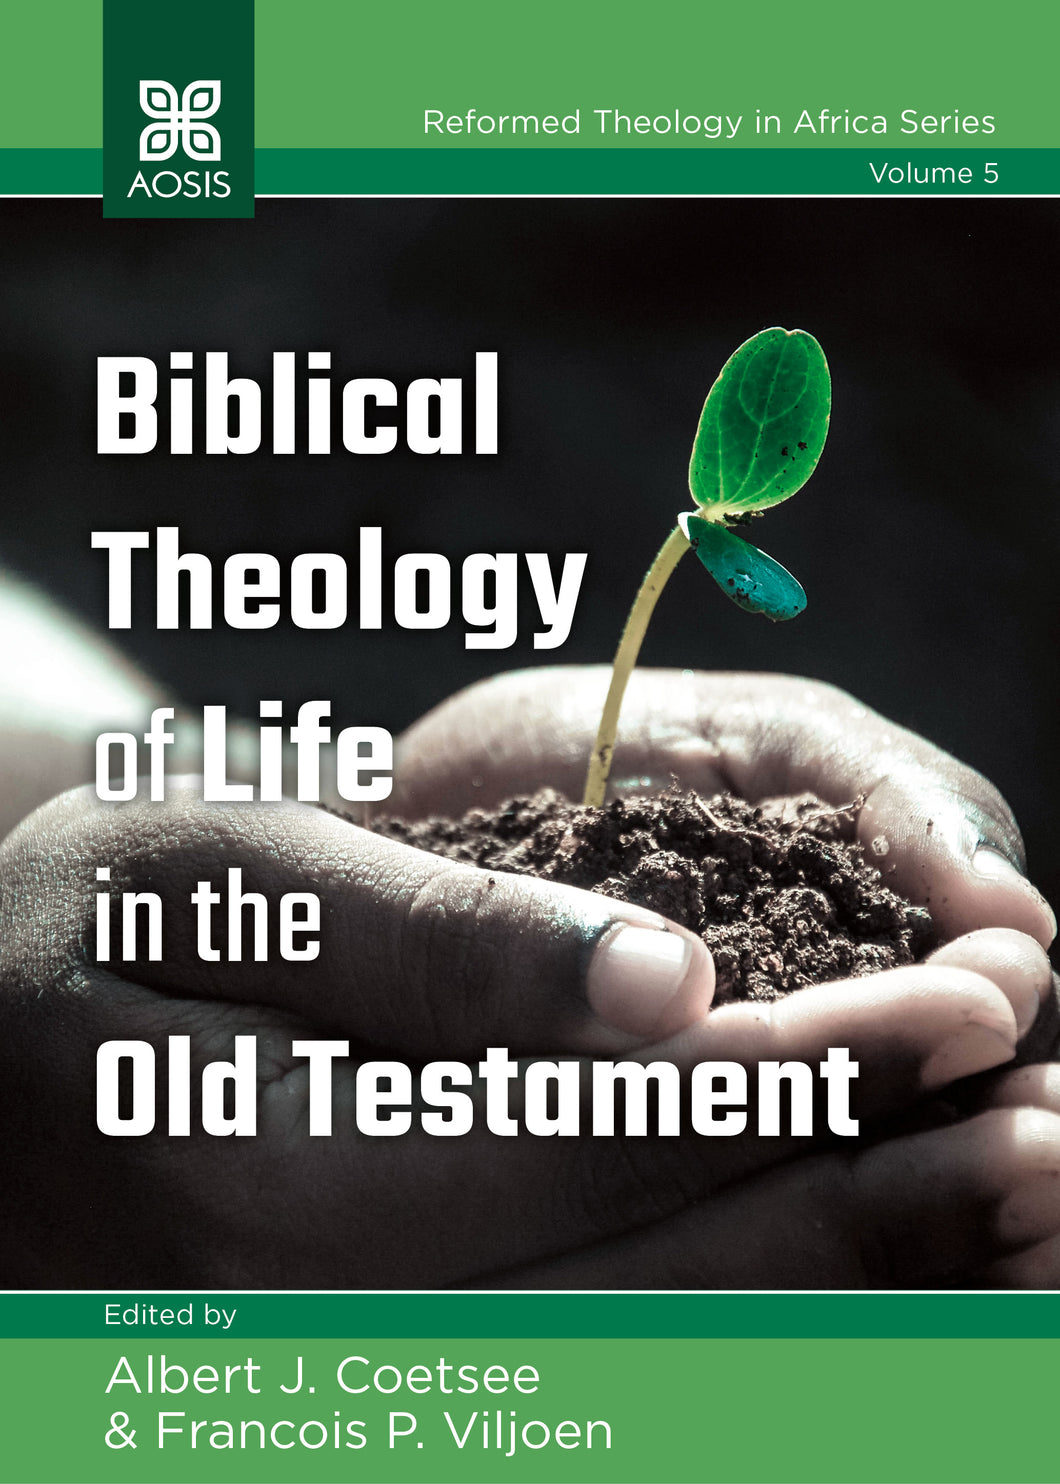 Biblical Theology of Life in the Old Testament (Print copy)